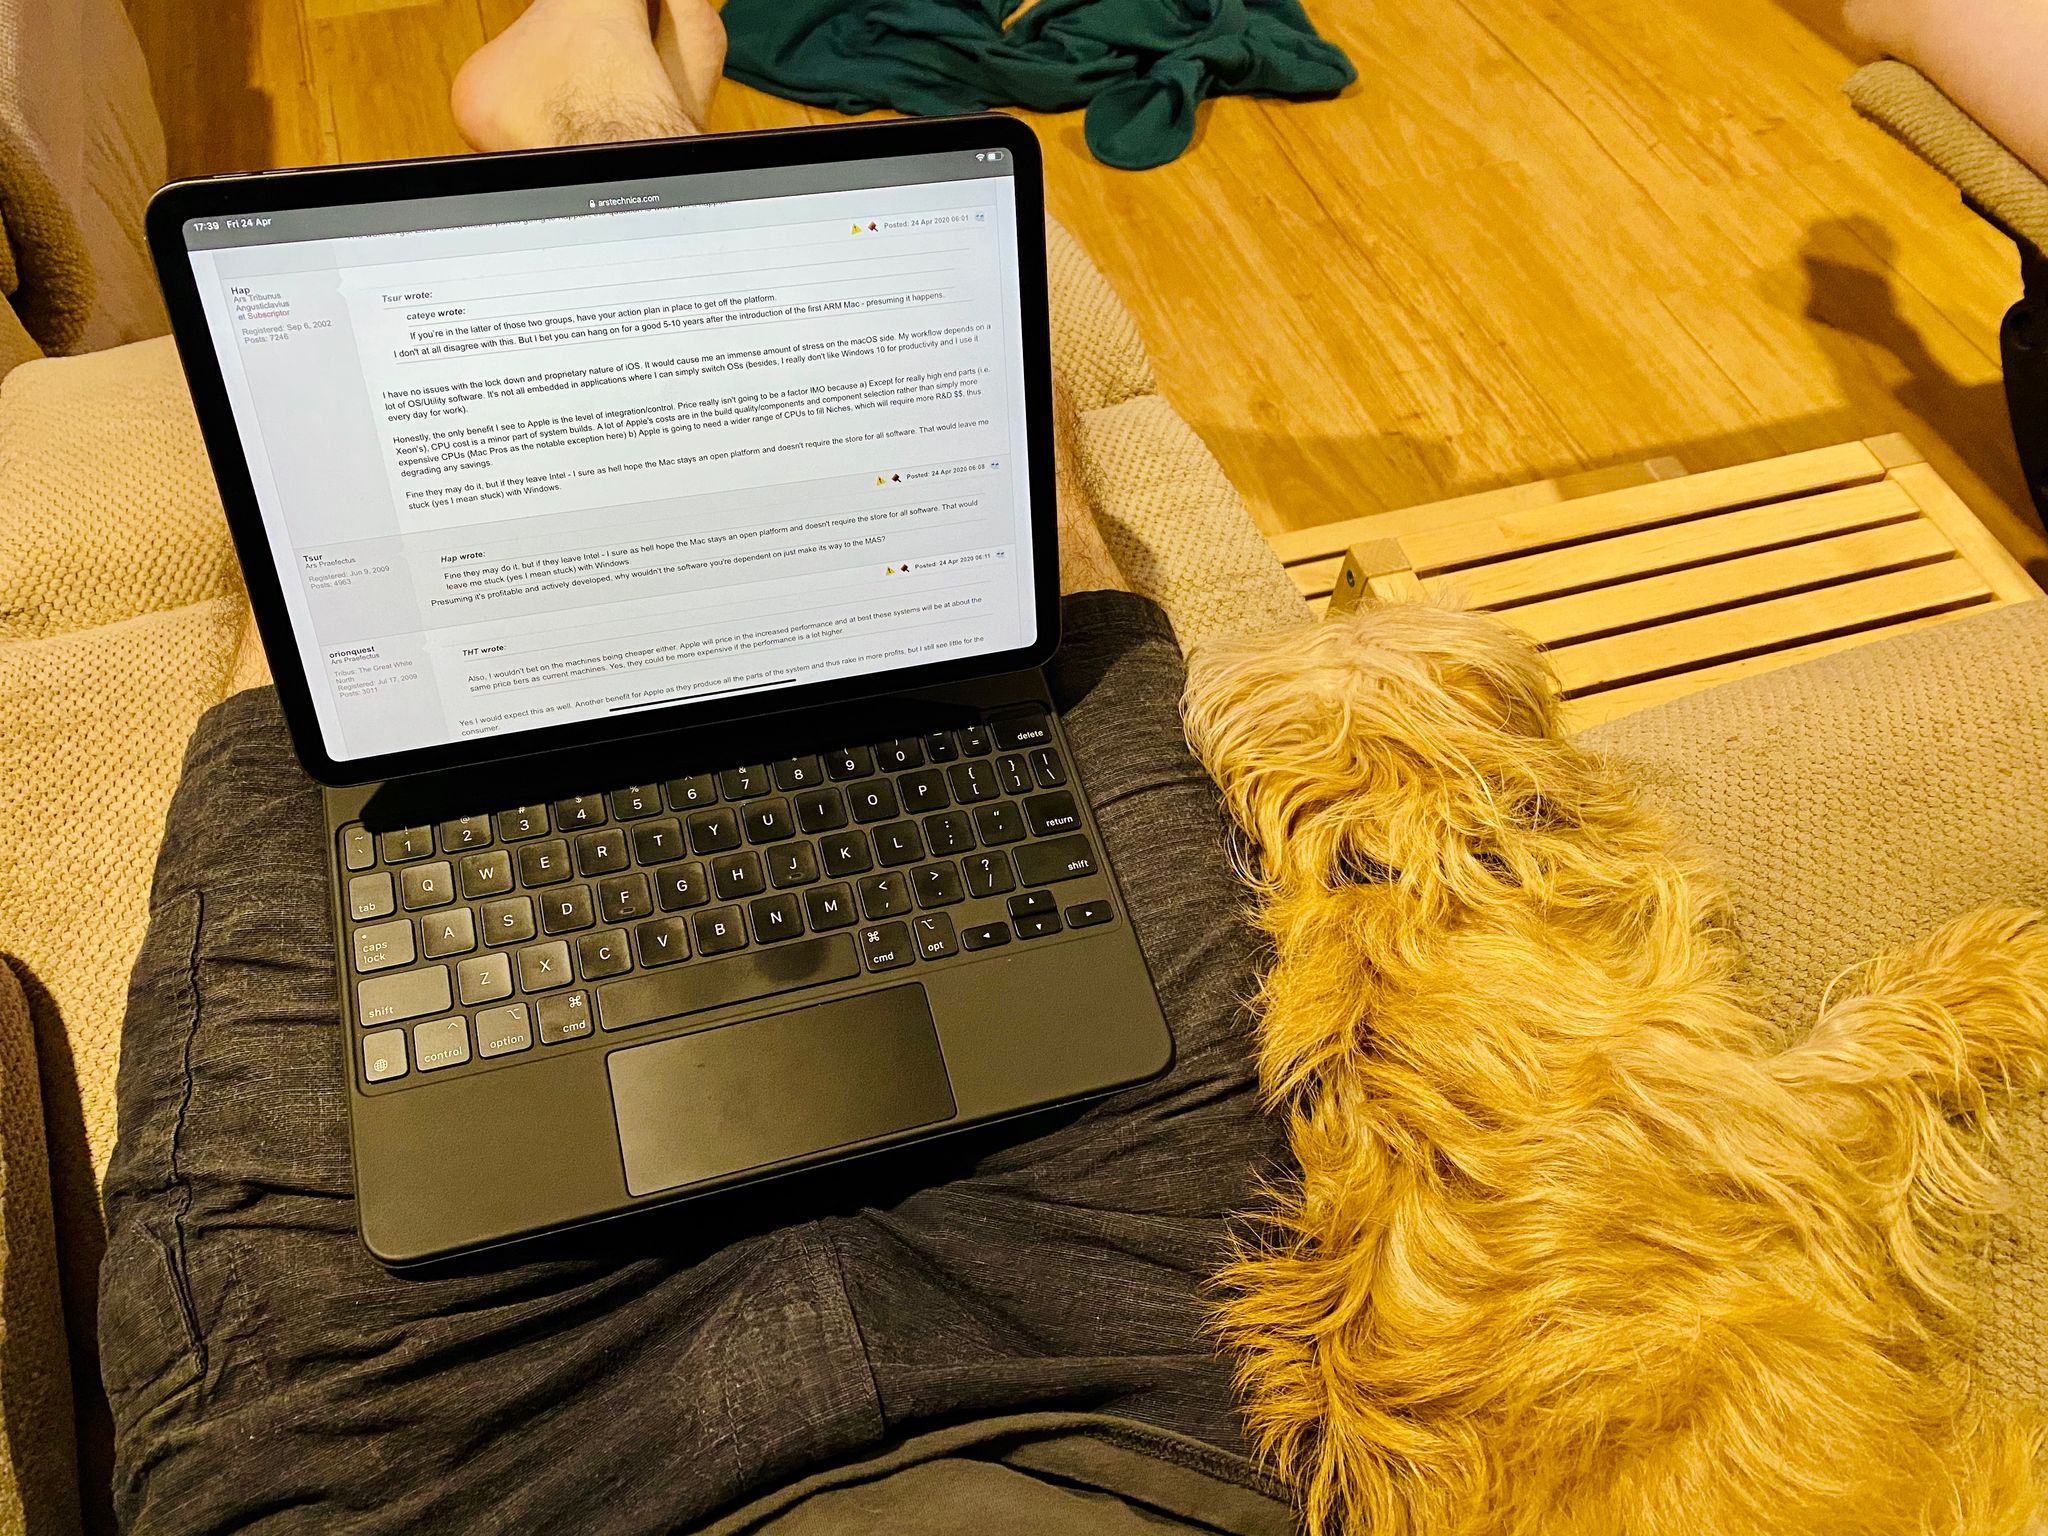 A photo taken looking from my point of view, I'm sitting on a reclining lounge with my feet up, iPad Pro with Magic Keyboard on my lap, and a small scruffy blonde dog lying snuggled up against my right leg.